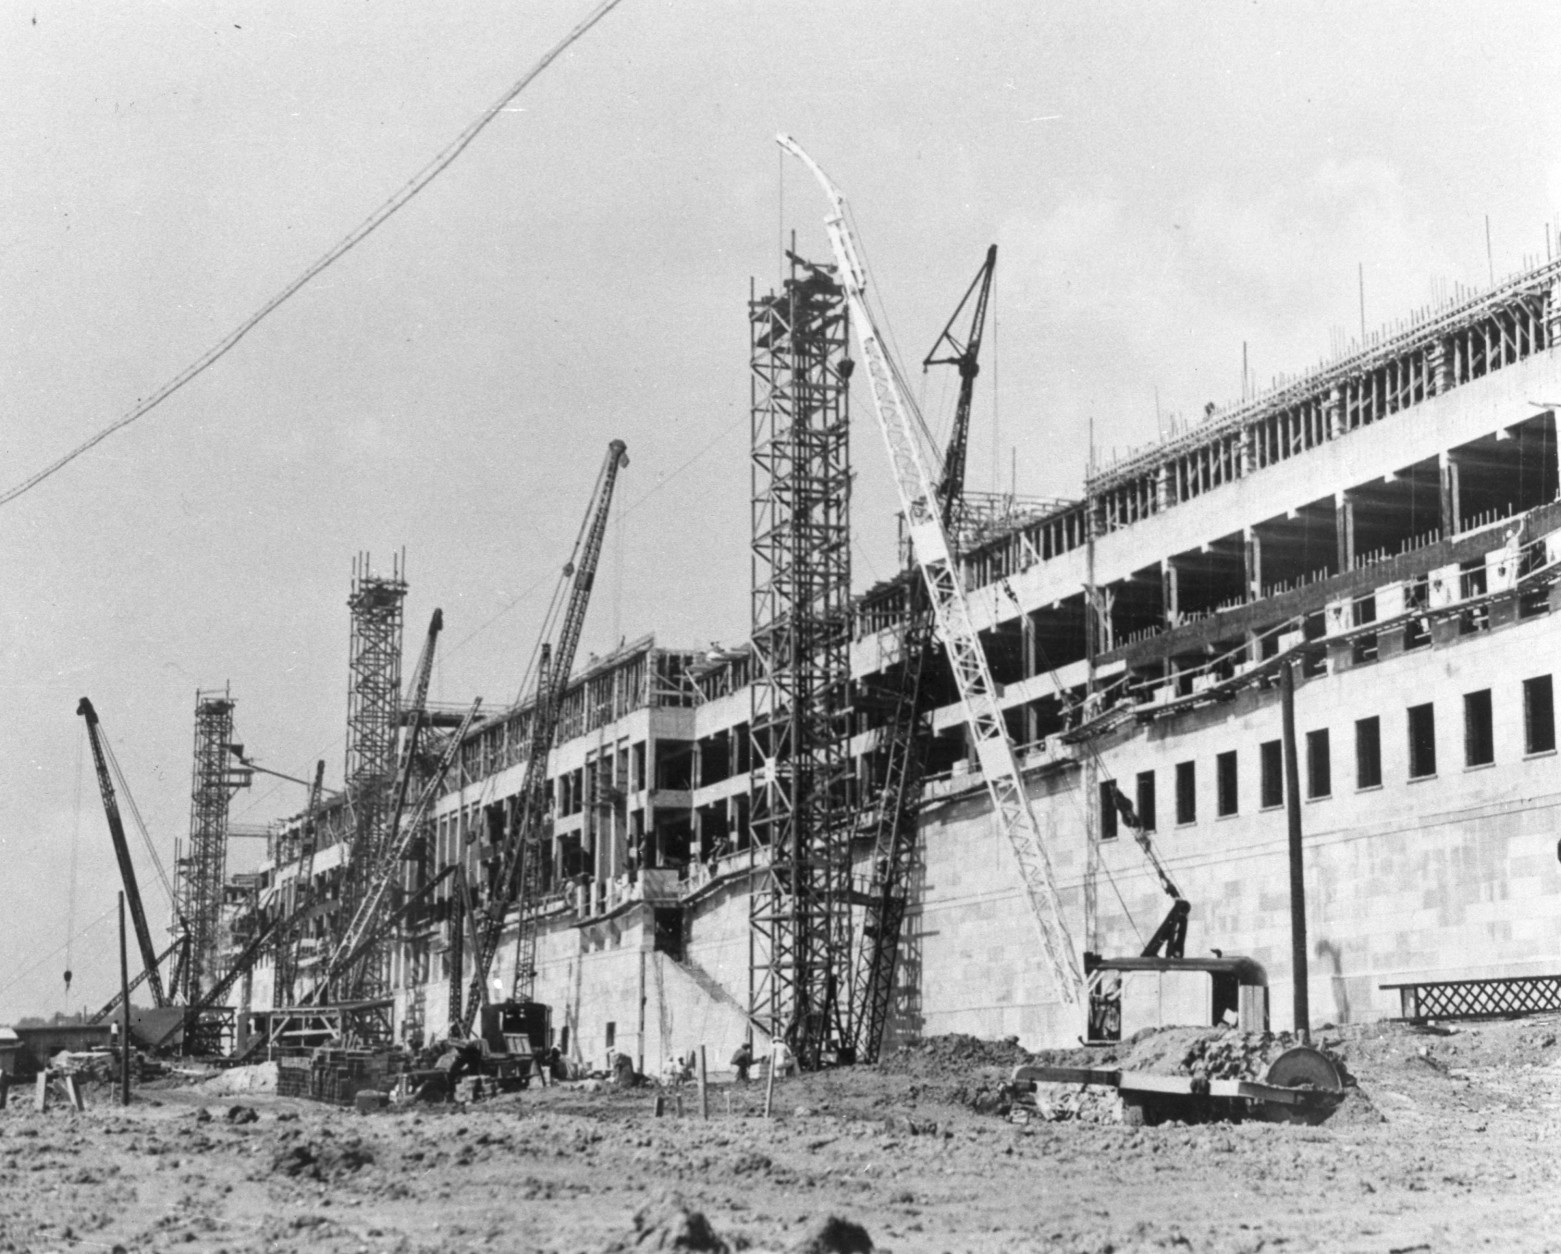 On this date in 1941, groundbreaking took place for the Pentagon. This is a 1942 photo of the early construction of the Pentagon in Arlington, Virginia. (AP Photo)